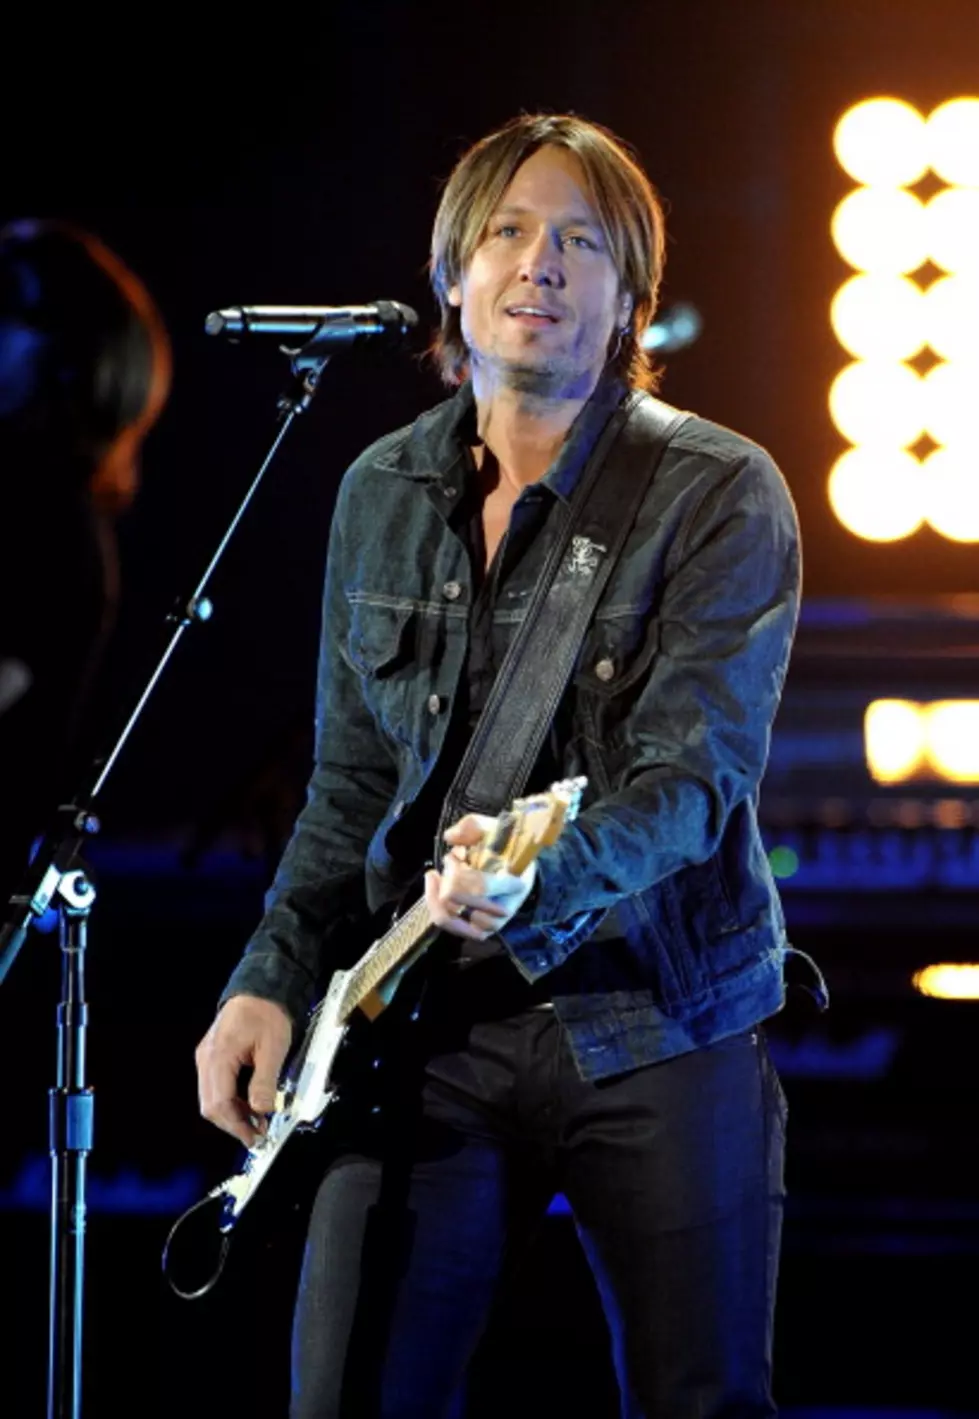 Keith Urban Gets KISSed by Taylor Swift